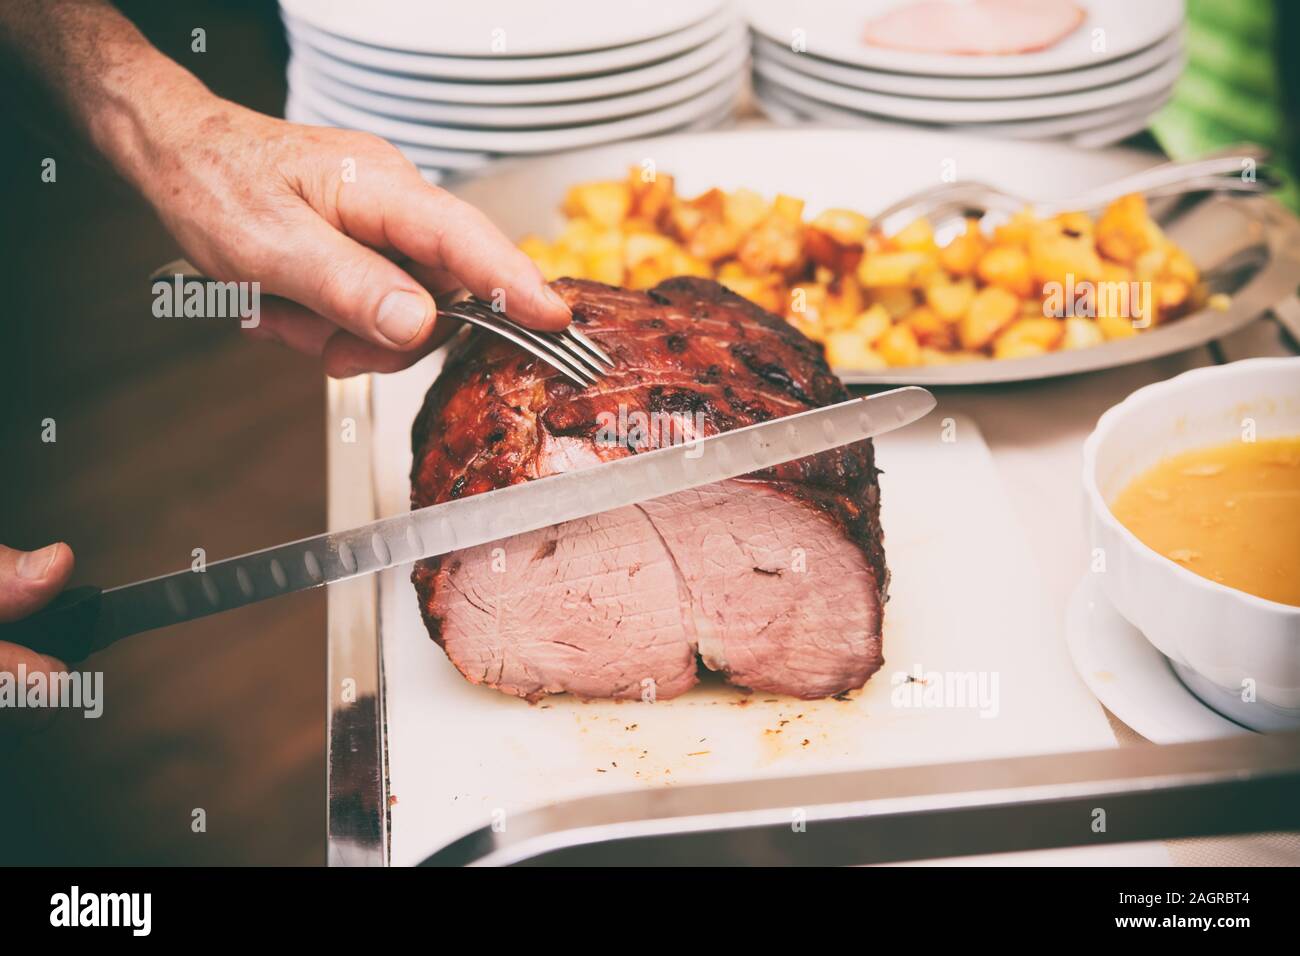 https://c8.alamy.com/comp/2AGRBT4/chef-is-cutting-beefsteak-with-carving-knife-toned-image-2AGRBT4.jpg